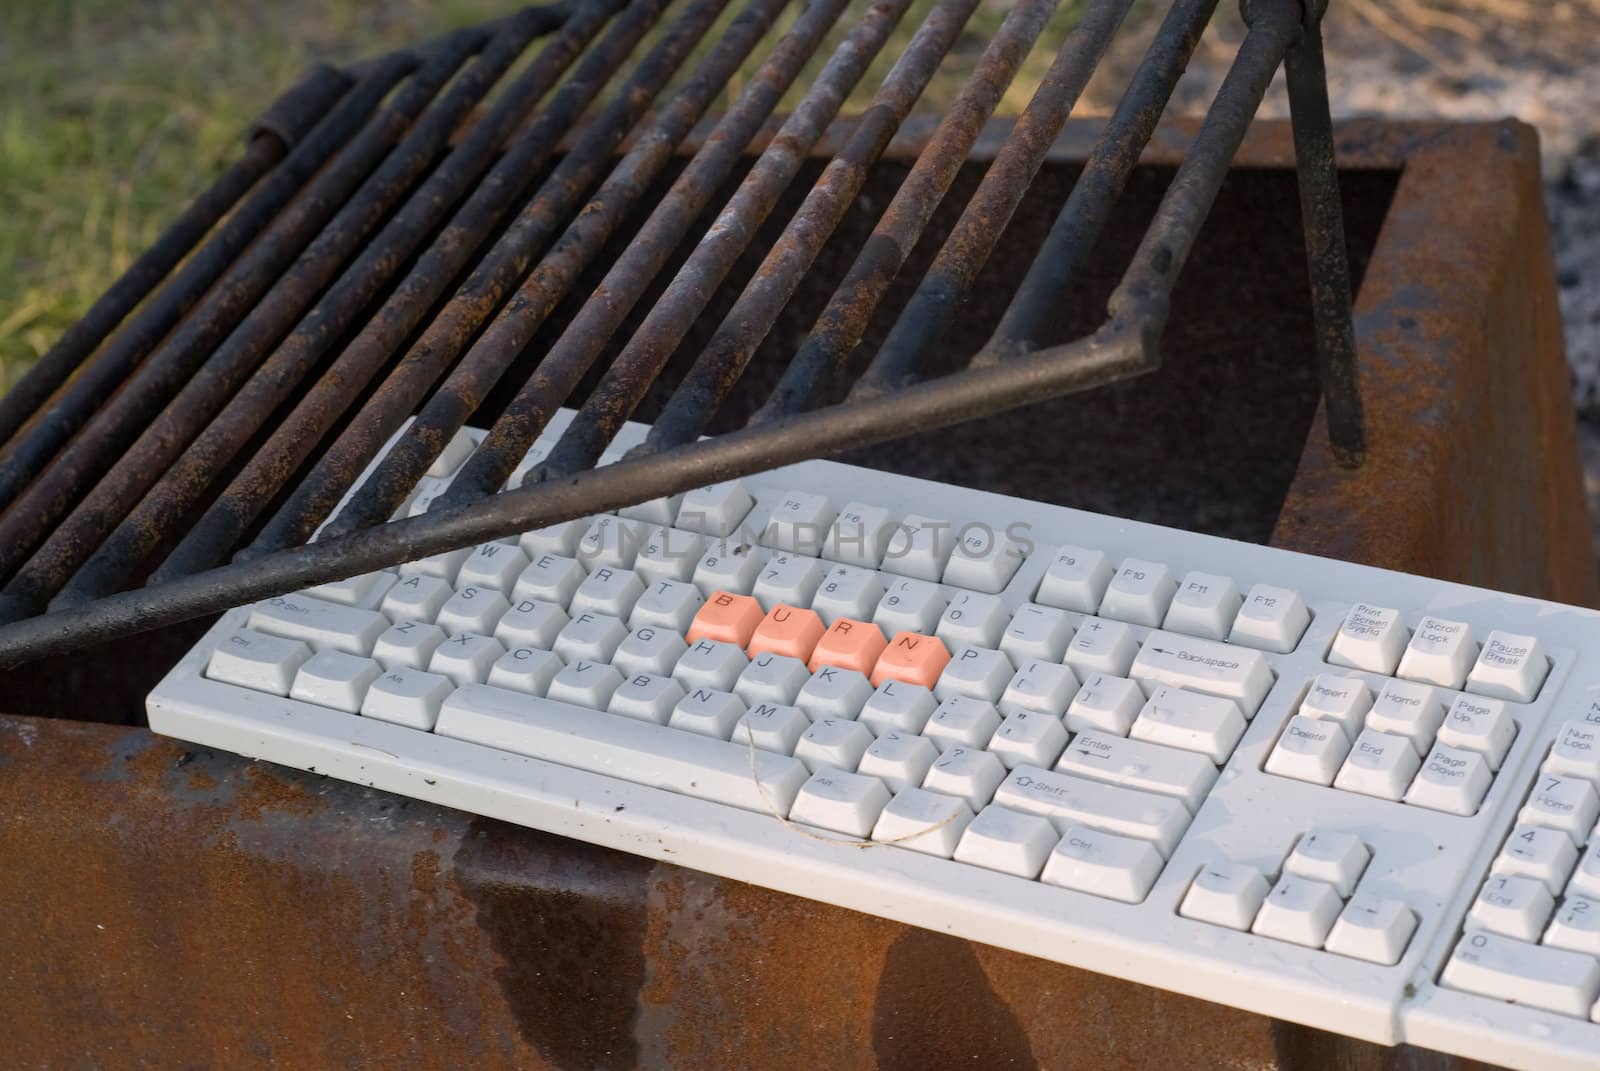 A computer keyboard in a fire pit with the word burn on it